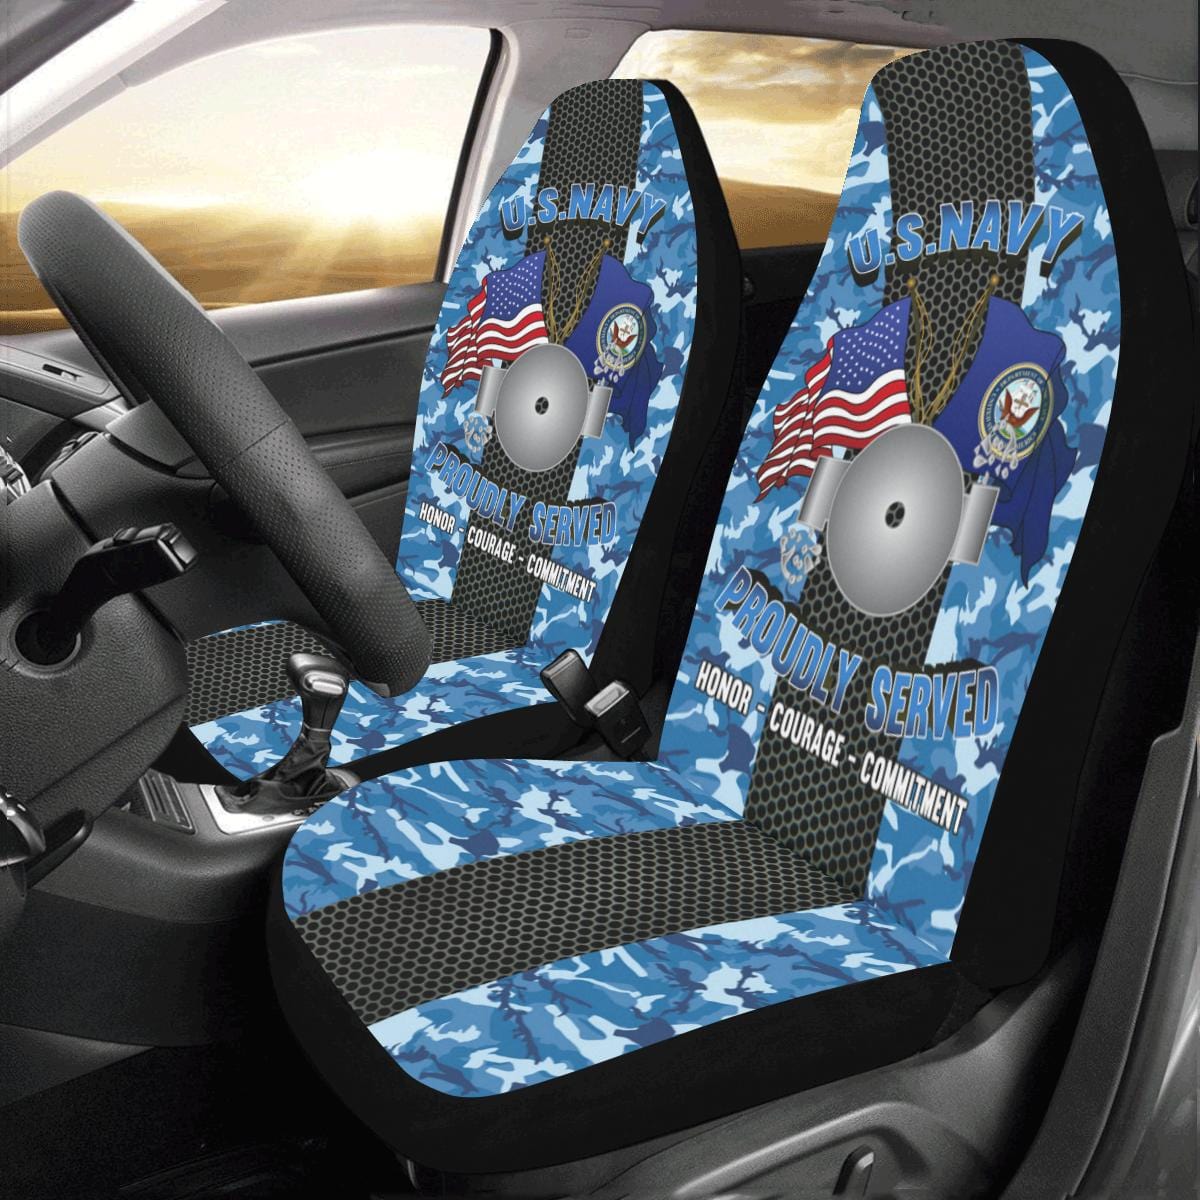 U.S Navy Boiler technician Navy BT Car Seat Covers (Set of 2)-SeatCovers-Navy-Rate-Veterans Nation